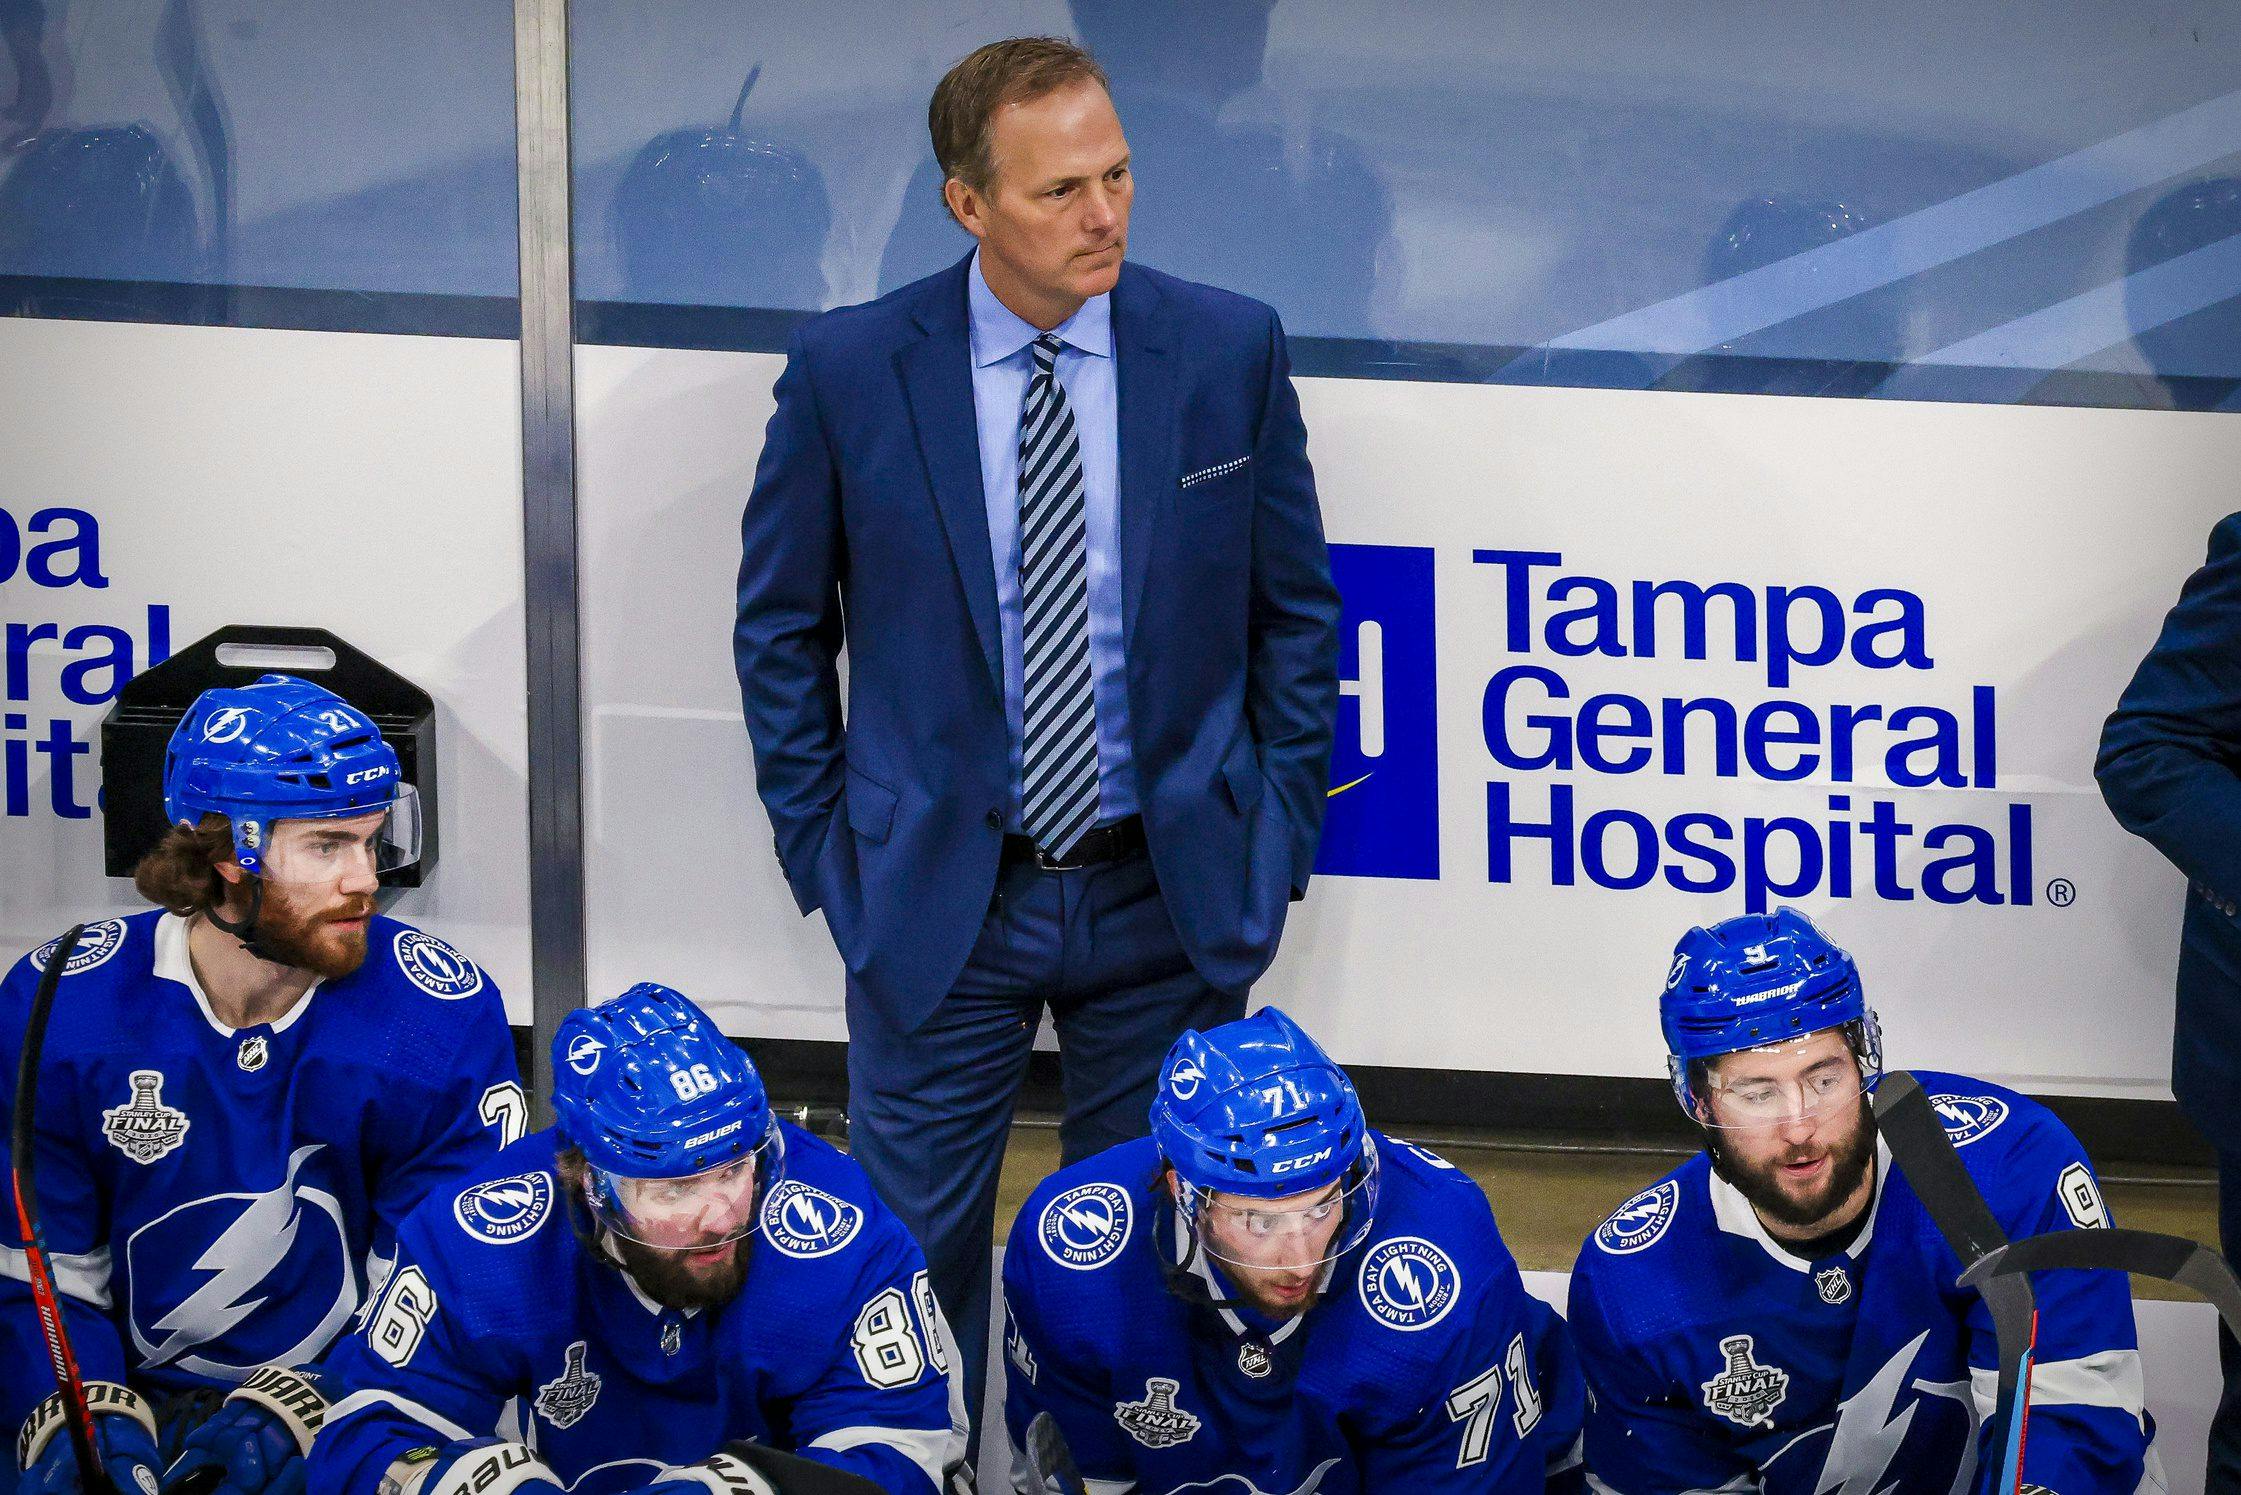 Evaluating Jon Cooper’s comments and the Tampa Bay Lightning’s losing streak